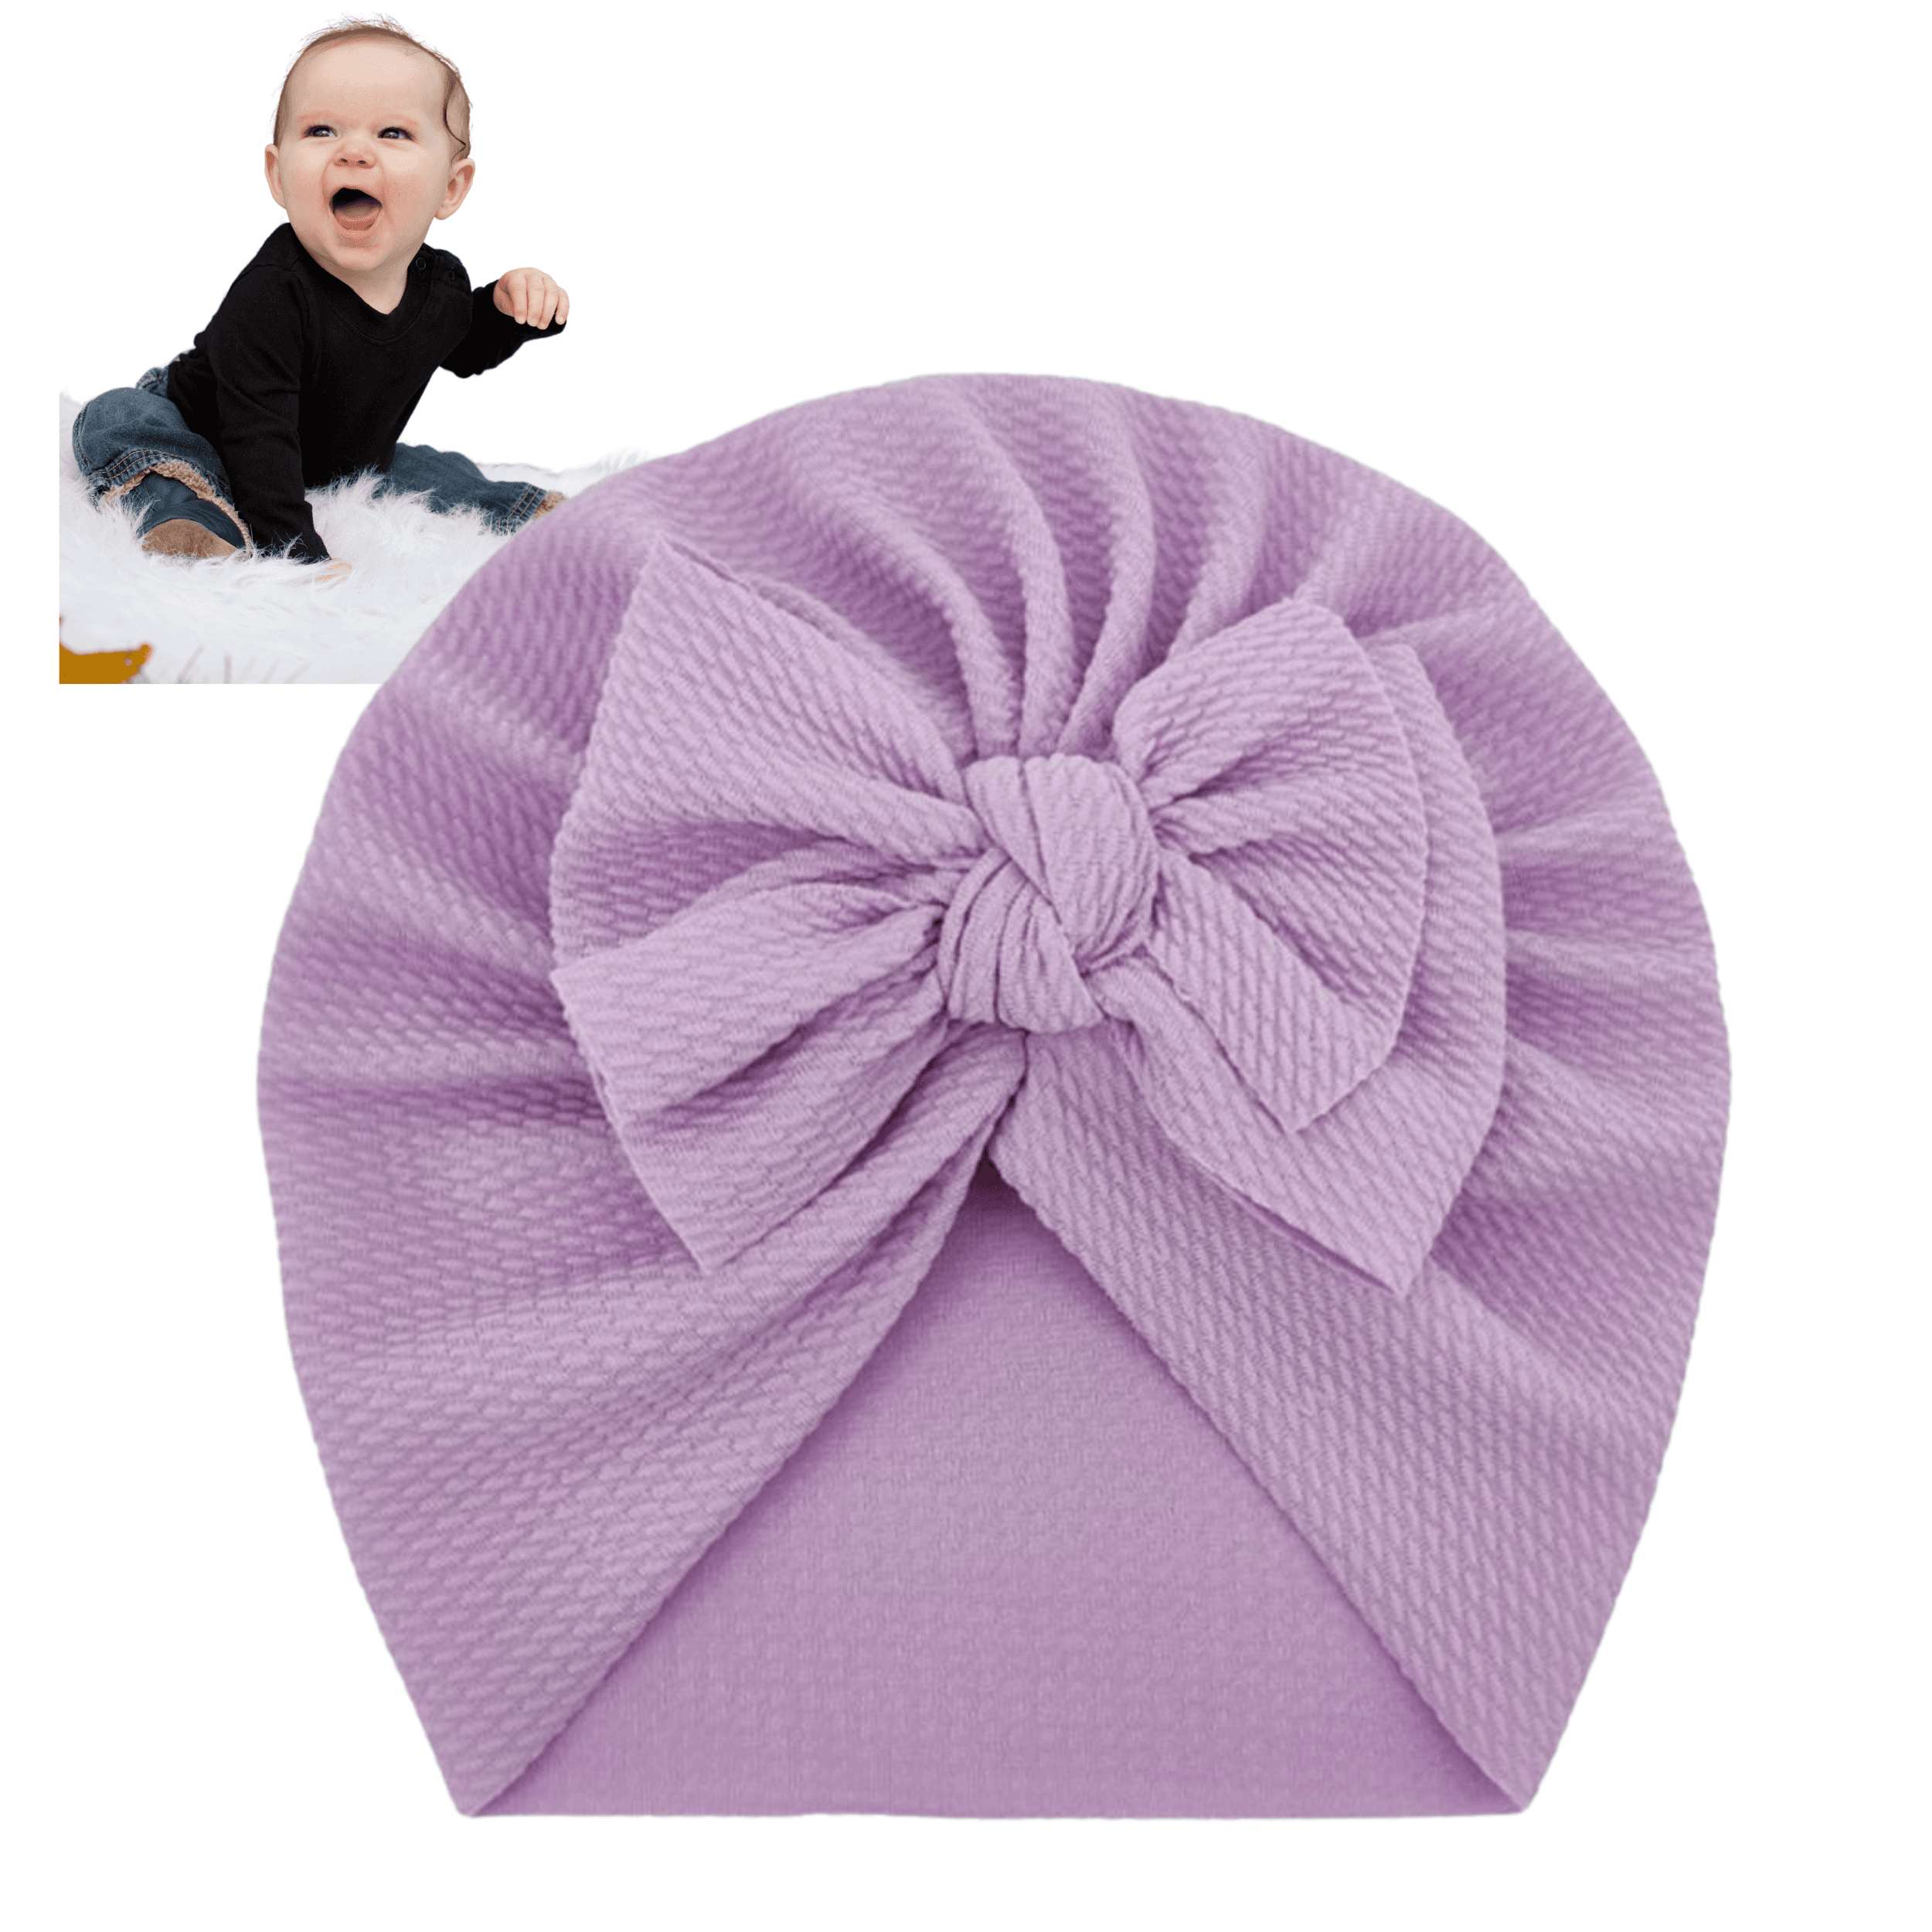 Baby turban with a bow, girl's hat - purple